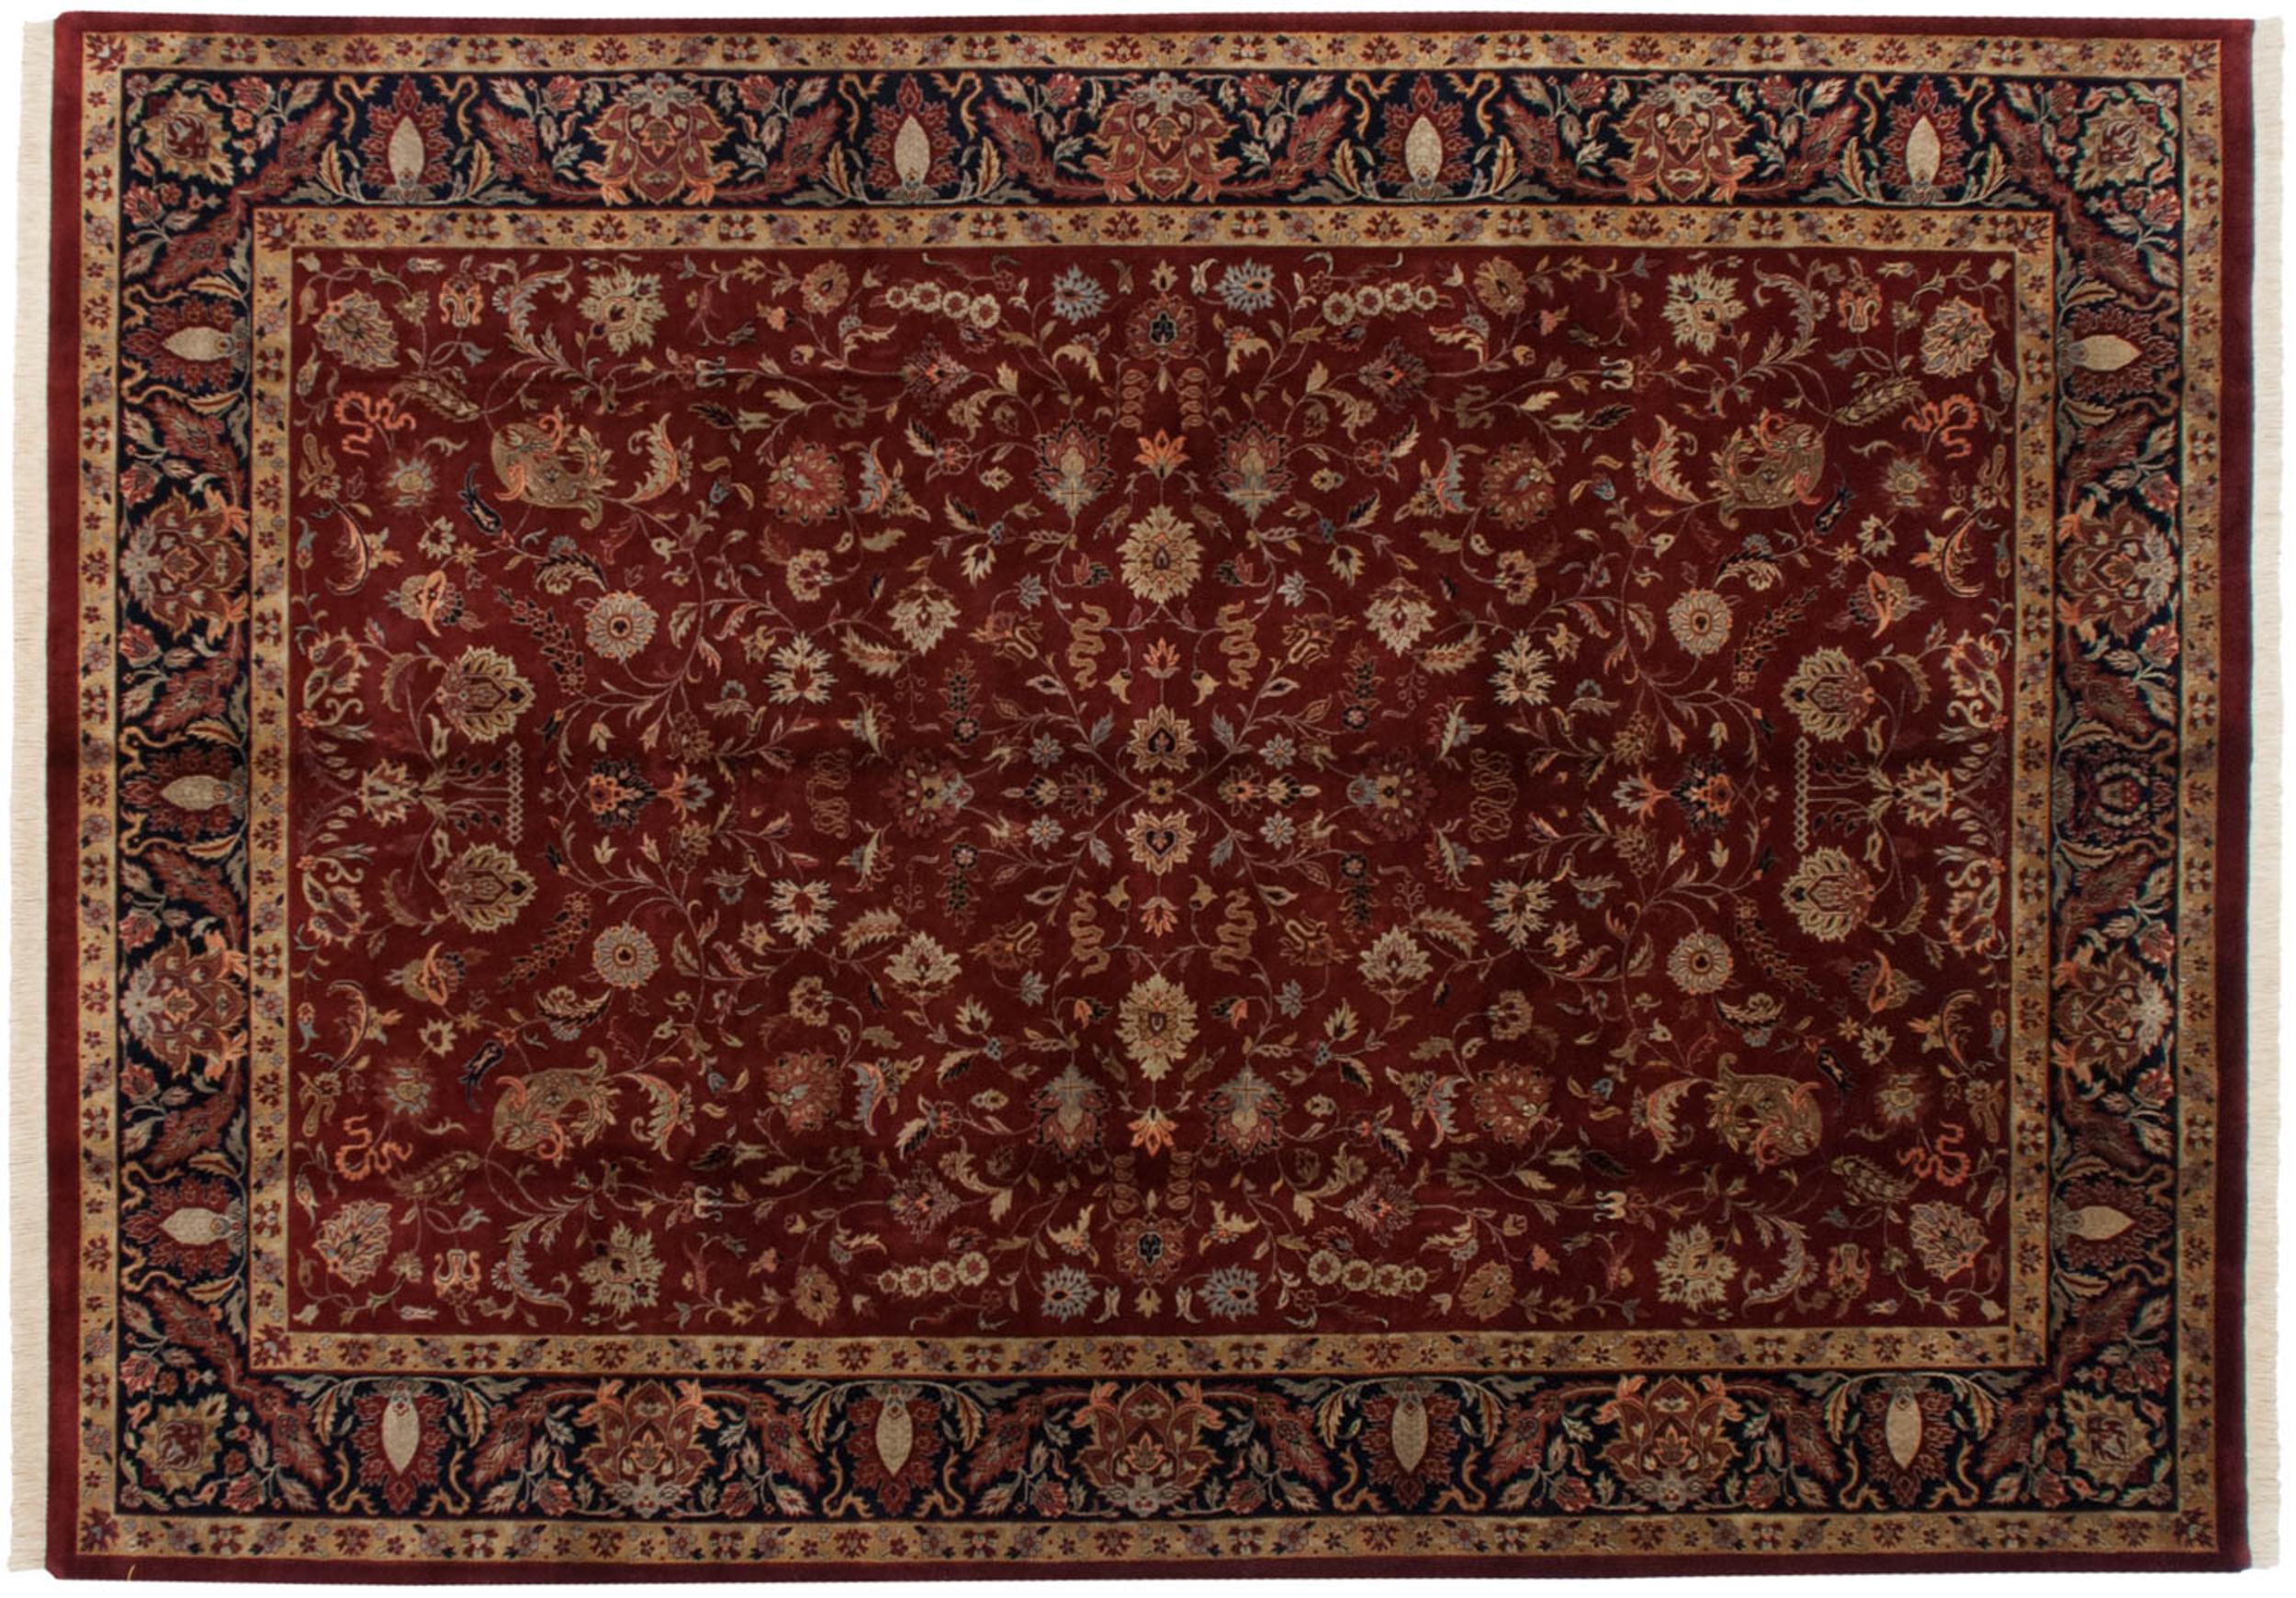 :: Allover covered field in a classic late 19th century design bearing scrolling tendrils, floral cross sections, bounty of detailed buds and blossoms and awesome deep saturated rich colors across. Weaver insignia top and center of the main border.